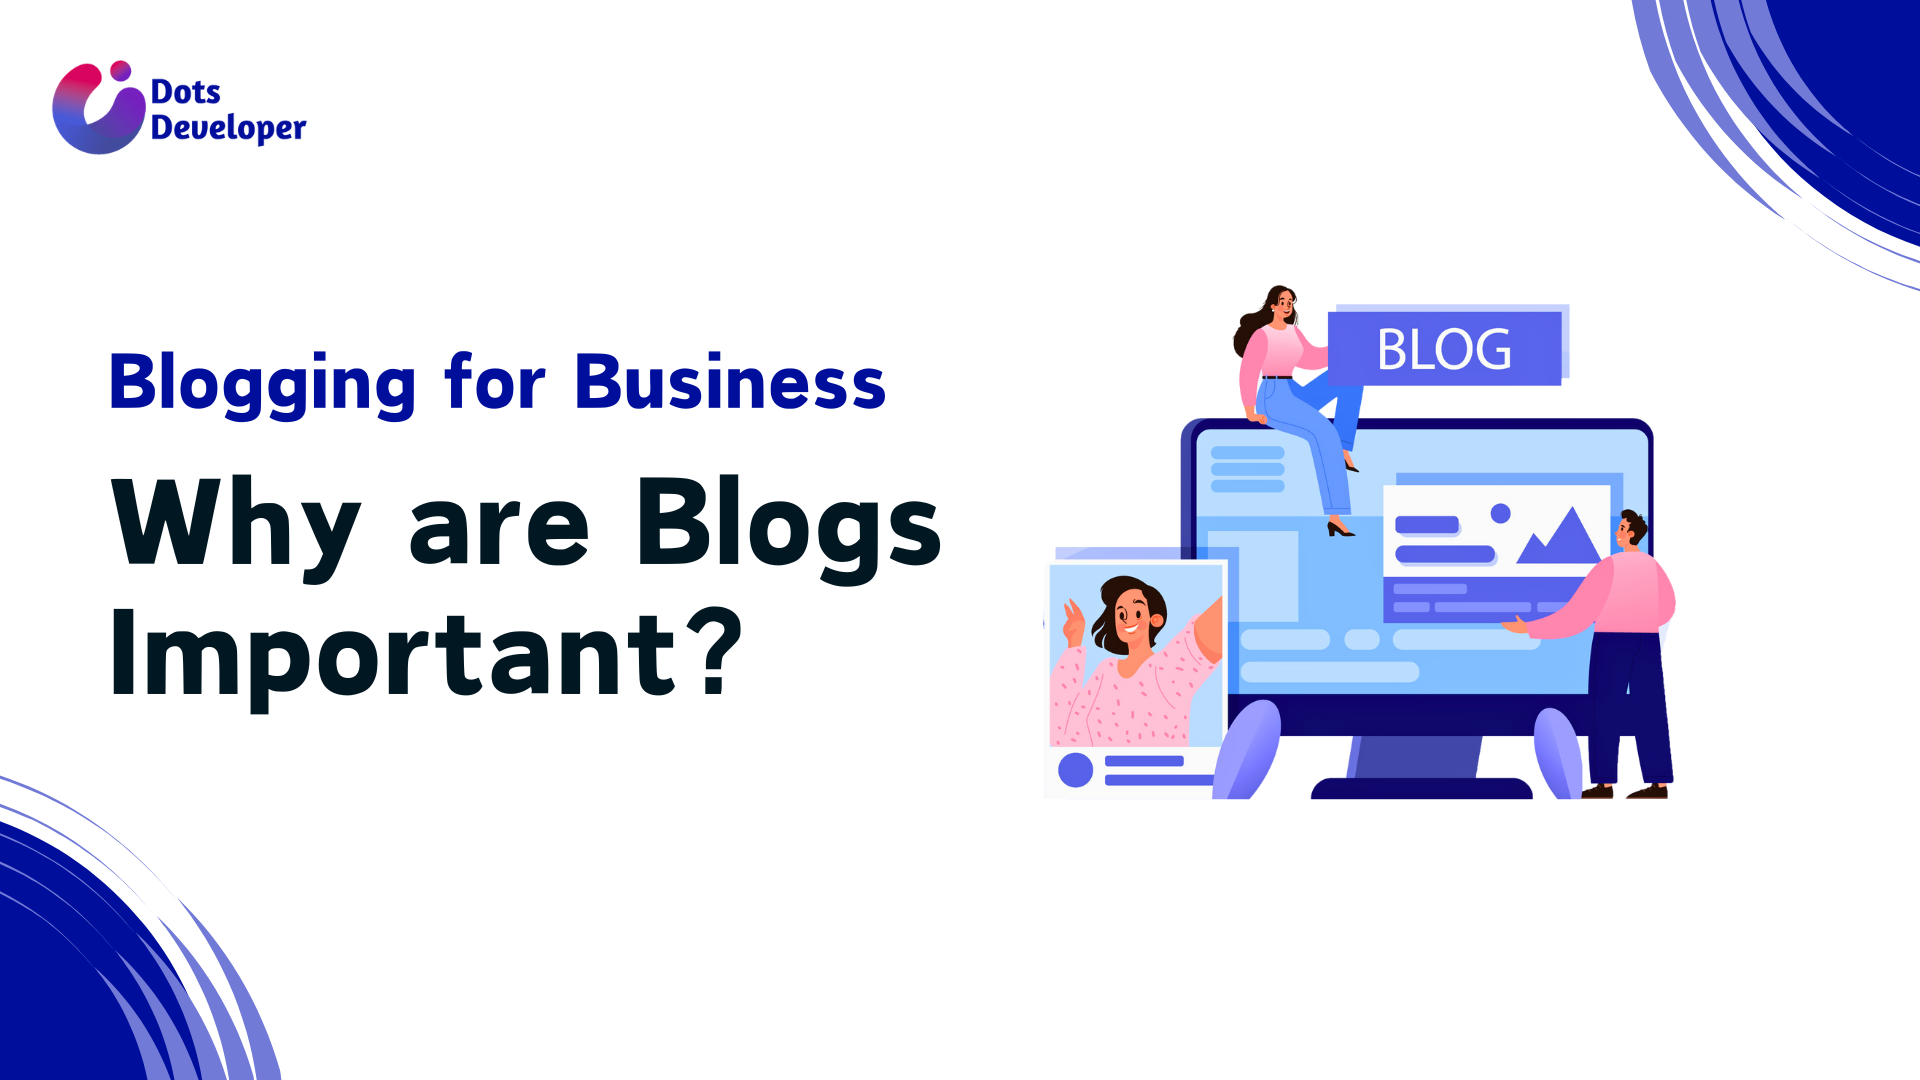 BLOGGING FOR BUSINESS: WHY ARE BLOGS IMPORTANT?